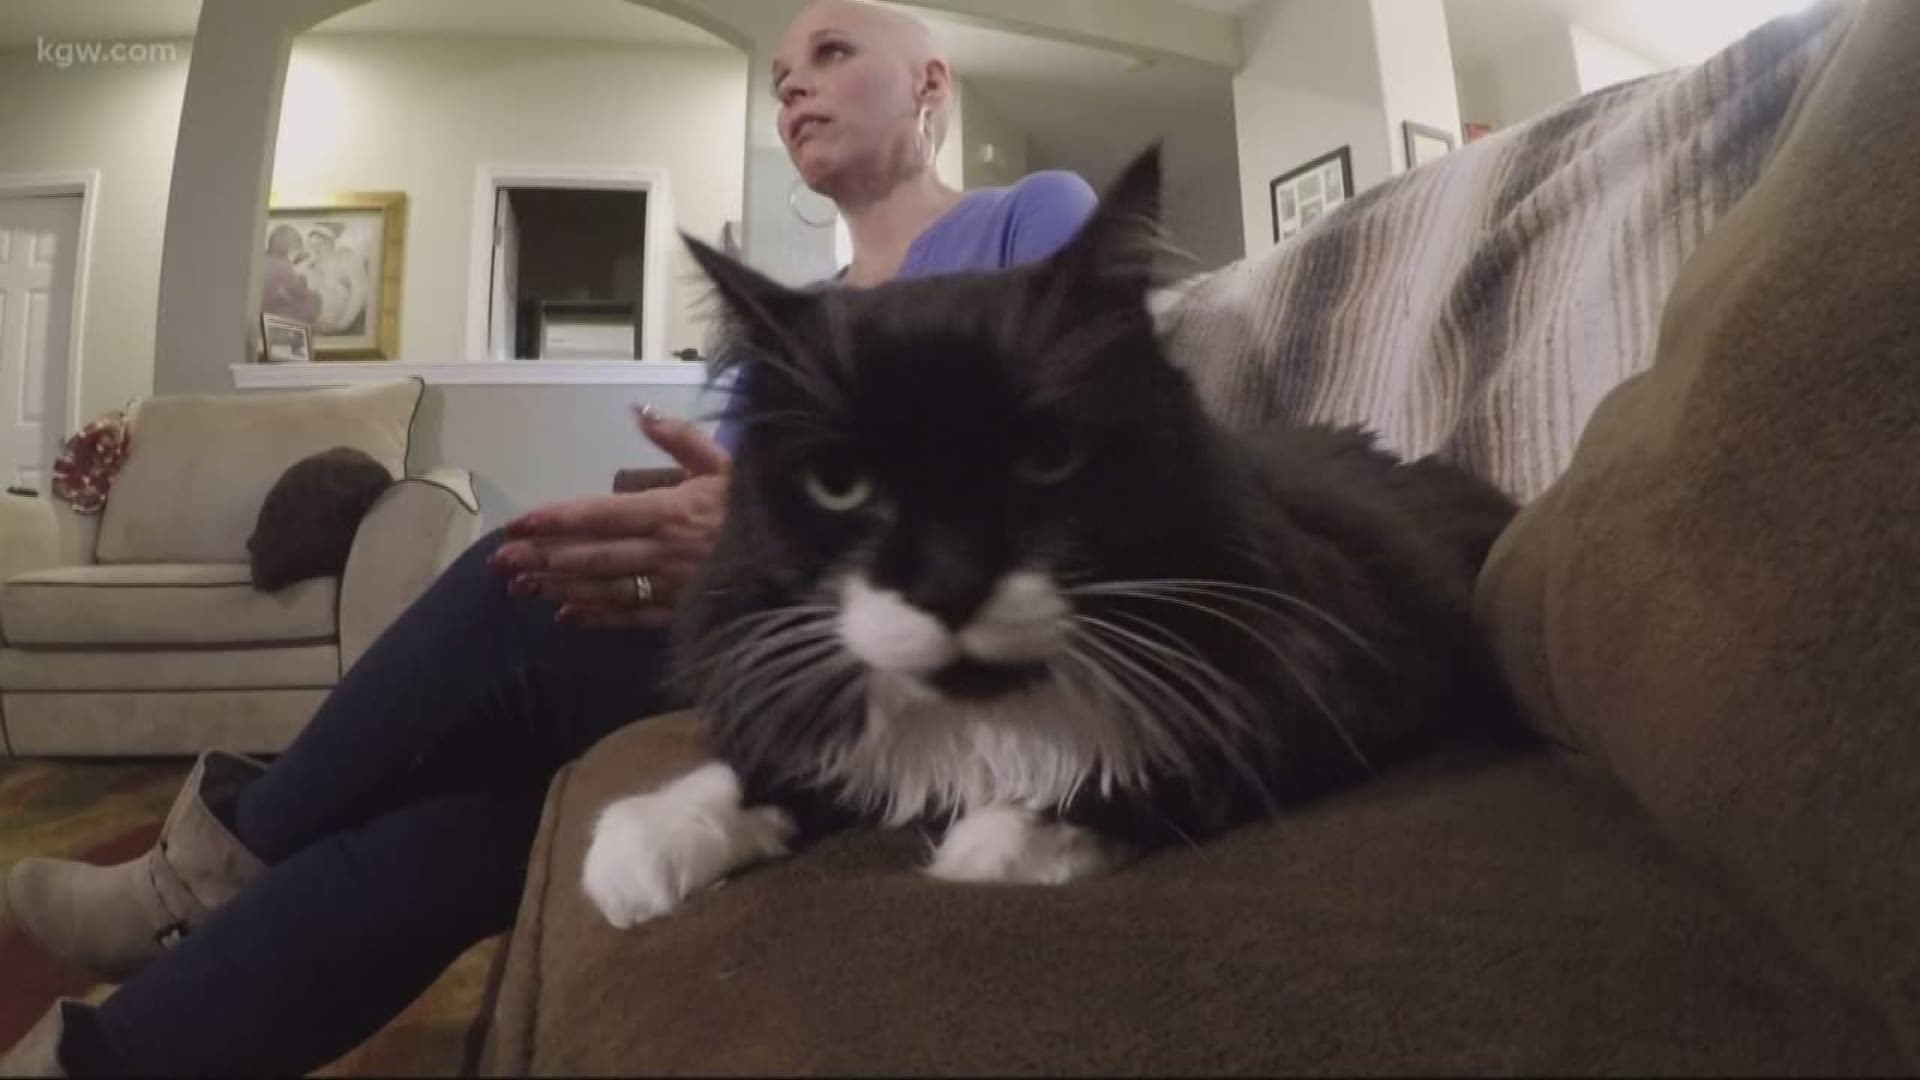 The Cat Saved Her Life Rescue Cat Helps Oregon Woman Detect Breast Cancer Kgw Com